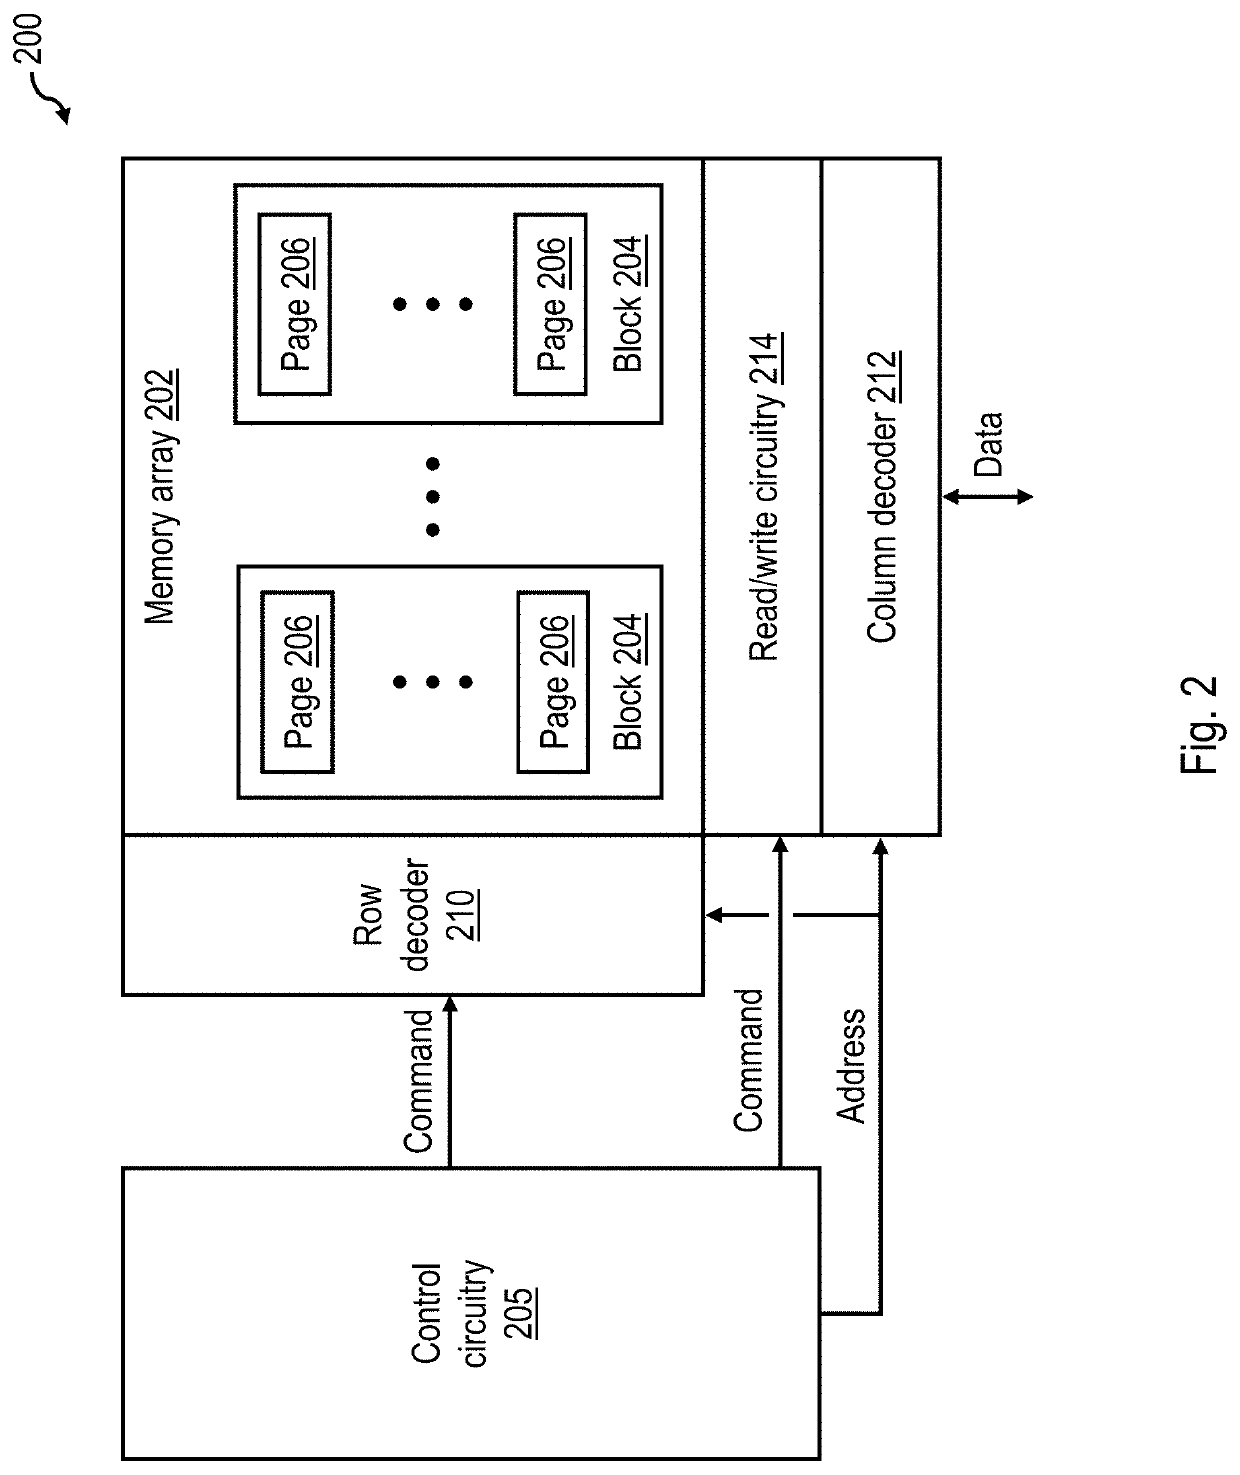 Background mitigation reads in a non-volatile memory system